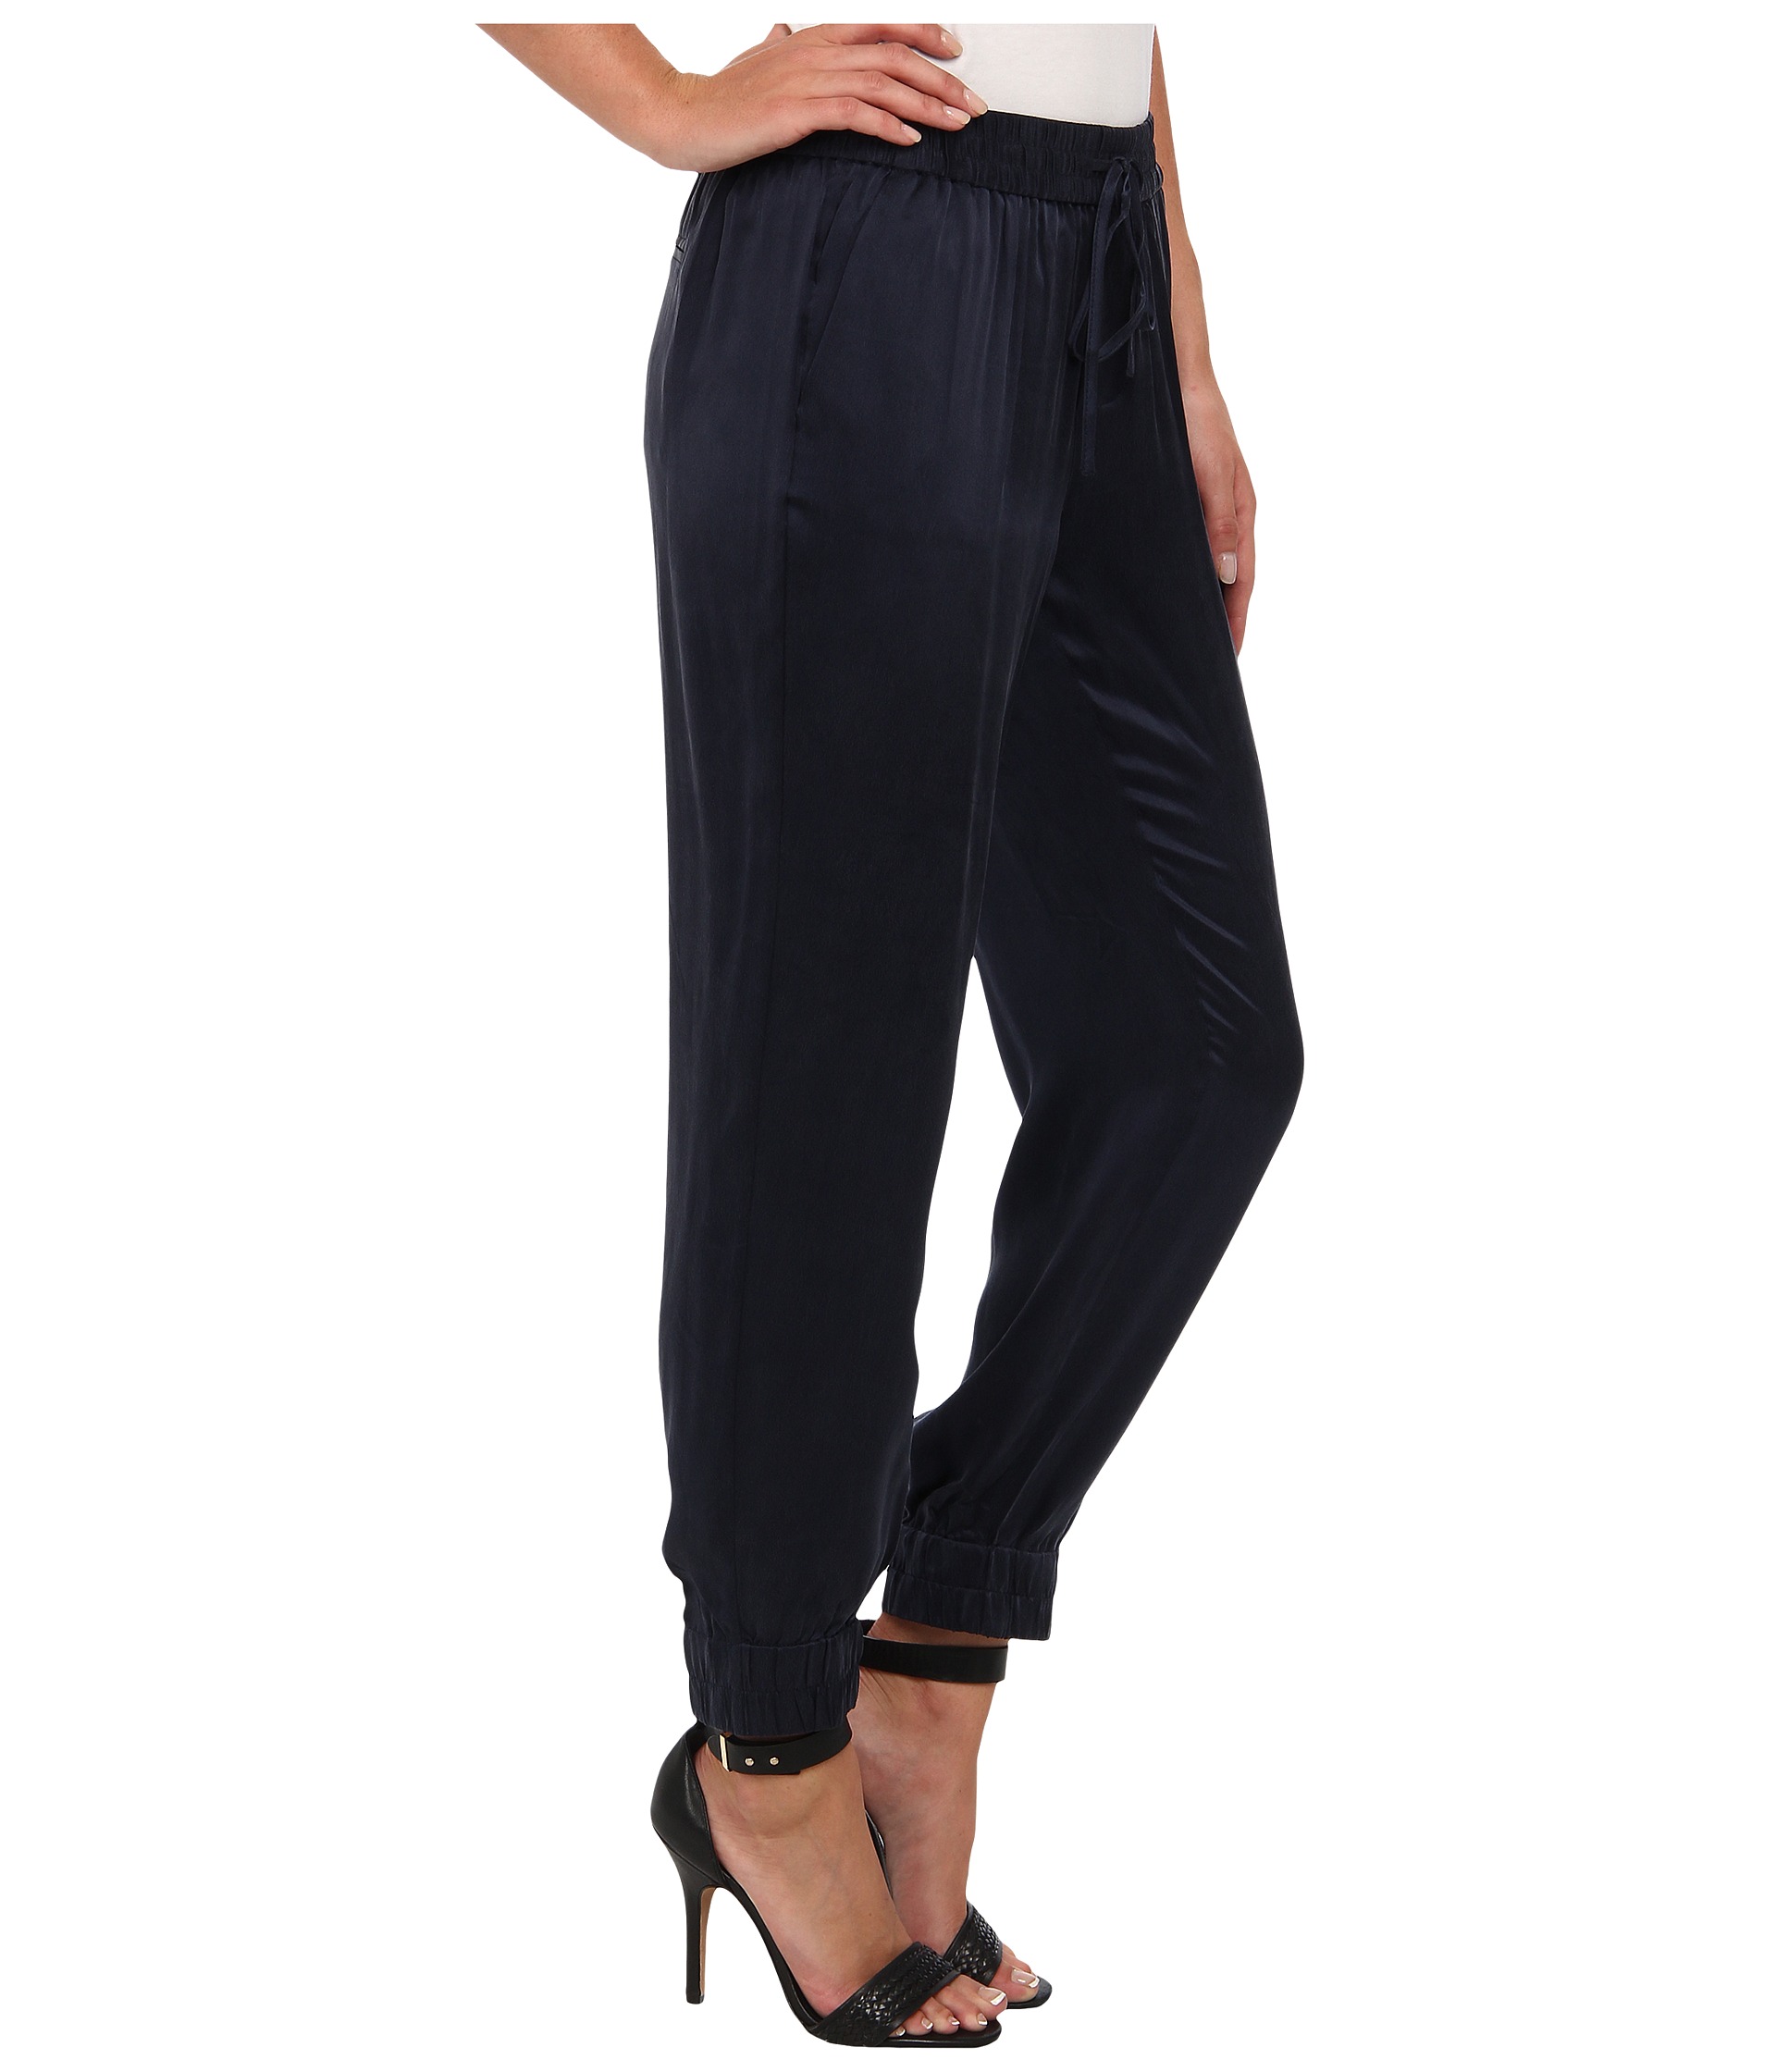 Paige Jadyn Pant Dark Ink Blue, Clothing | Shipped Free at Zappos